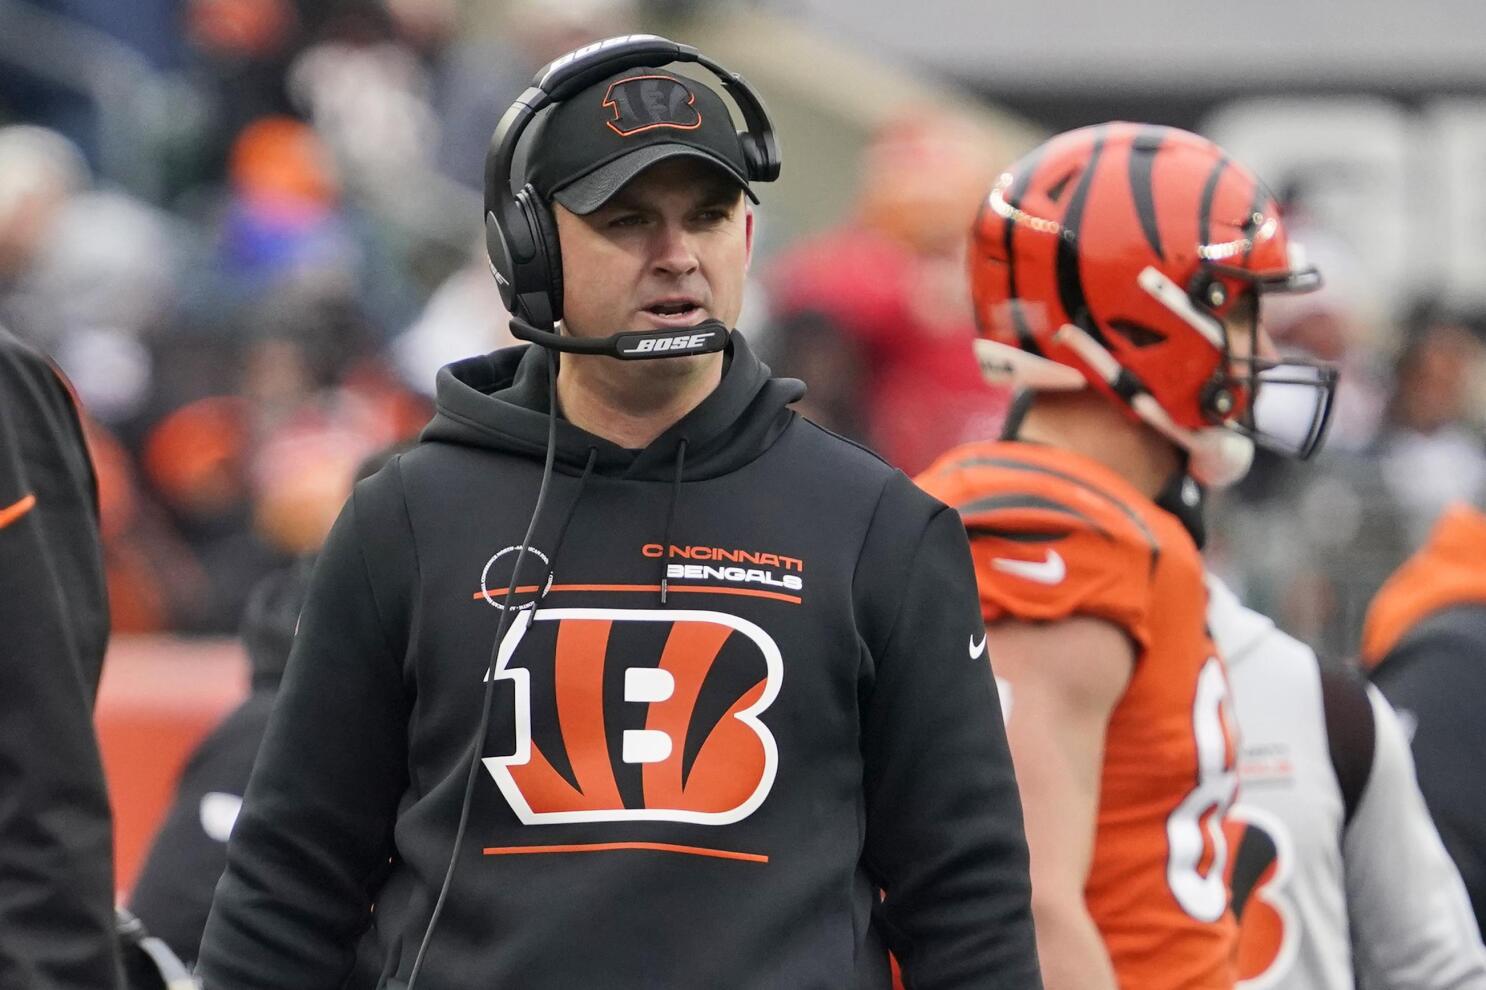 Postgame Quotes From Joe Burrow, Ja'Marr Chase, Zac Taylor after the Bengals  win over the Ravens